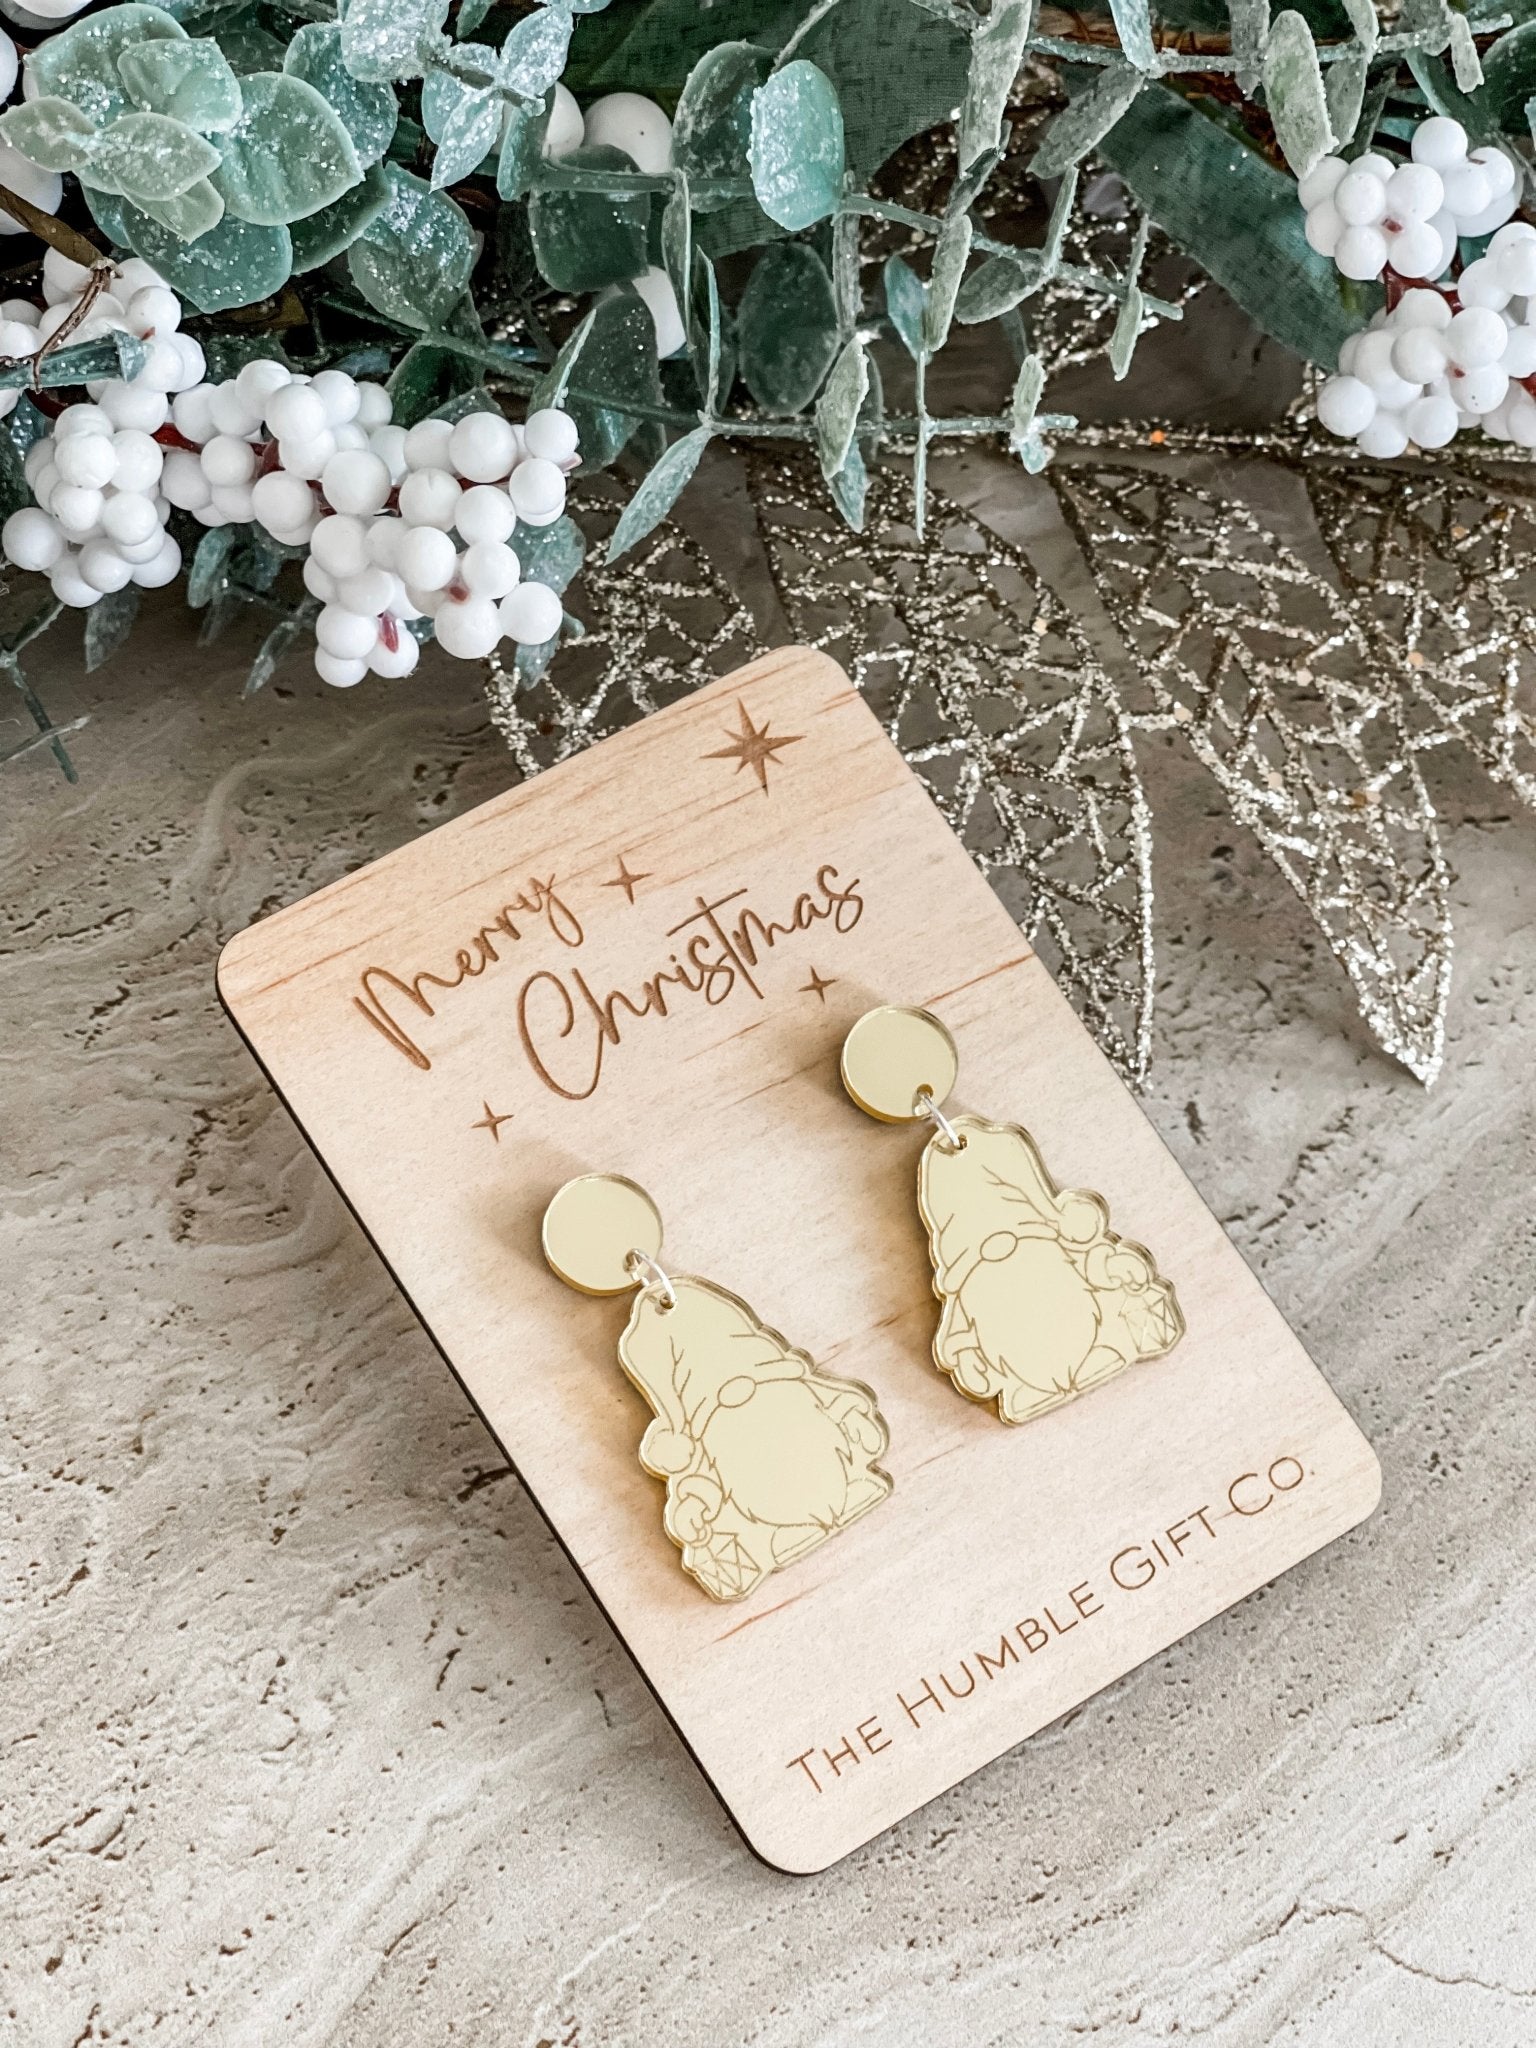 Gnome with a Lantern Christmas Earrings - The Humble Gift Co.